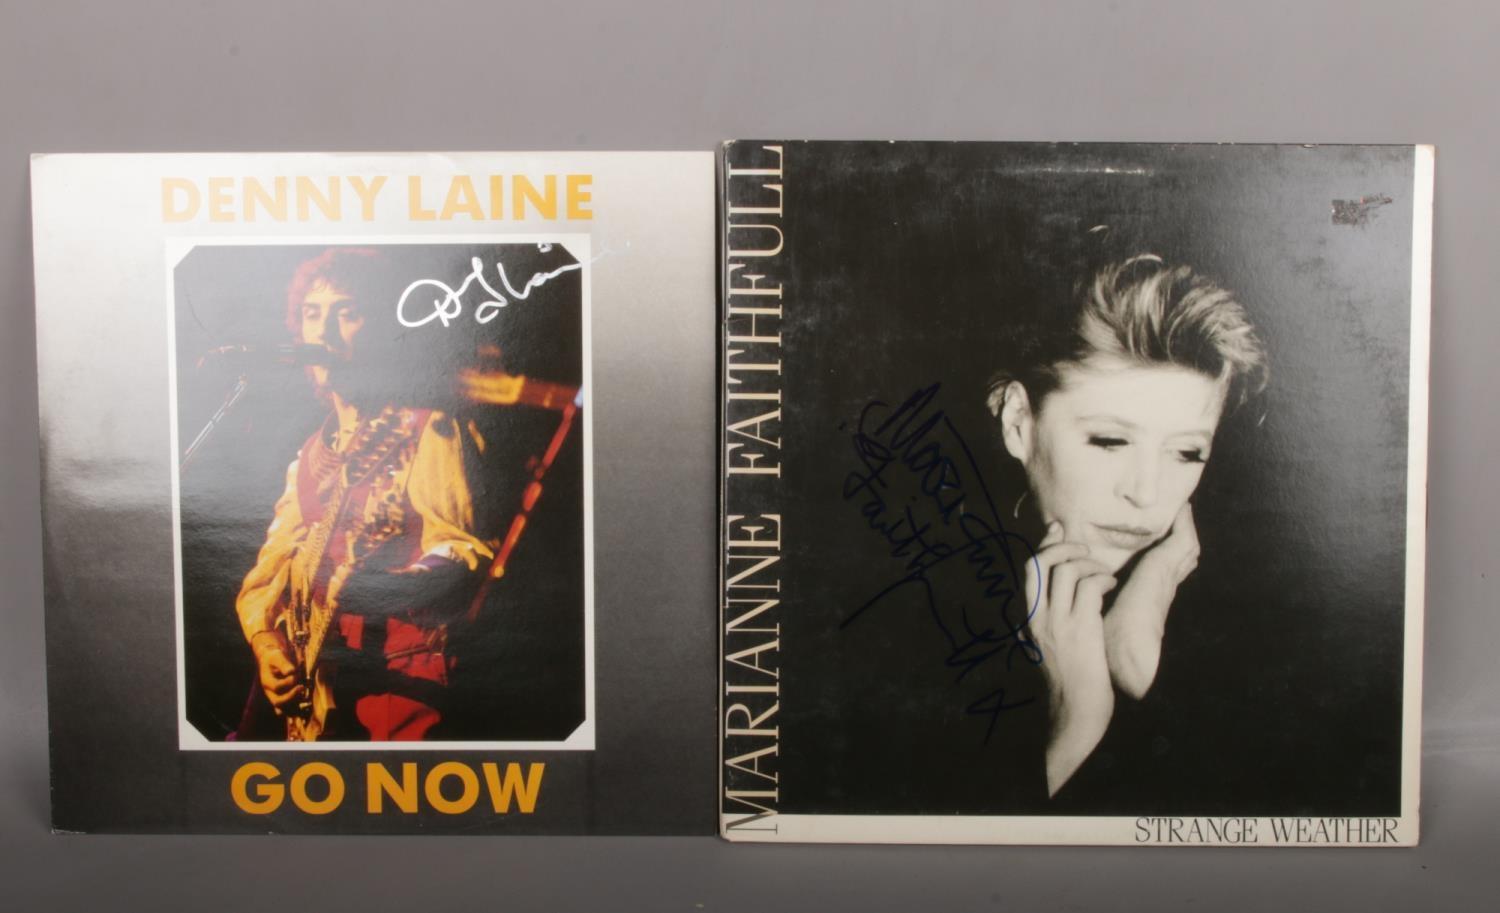 An autographed Marianne Faithful Strange Weather LP record, along with an autographed Denny Laine Go